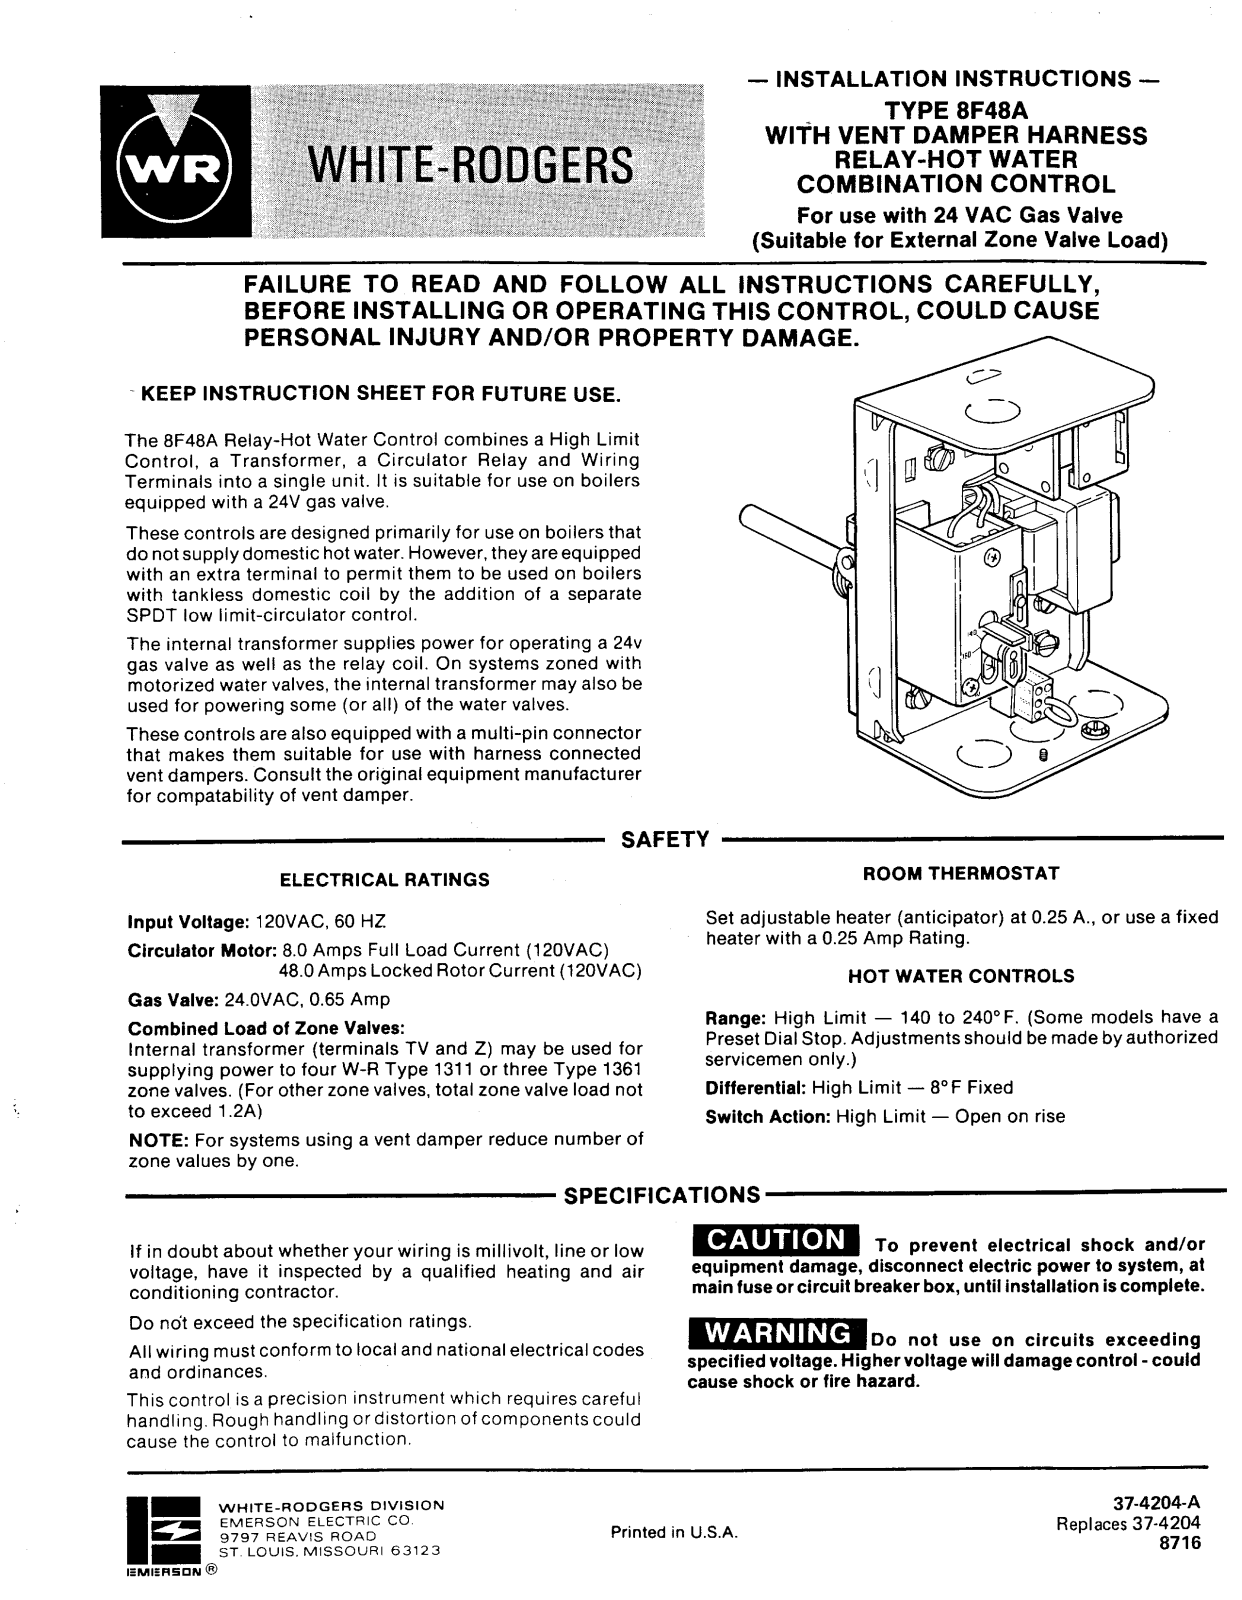 White-rodgers 8F48A User Manual